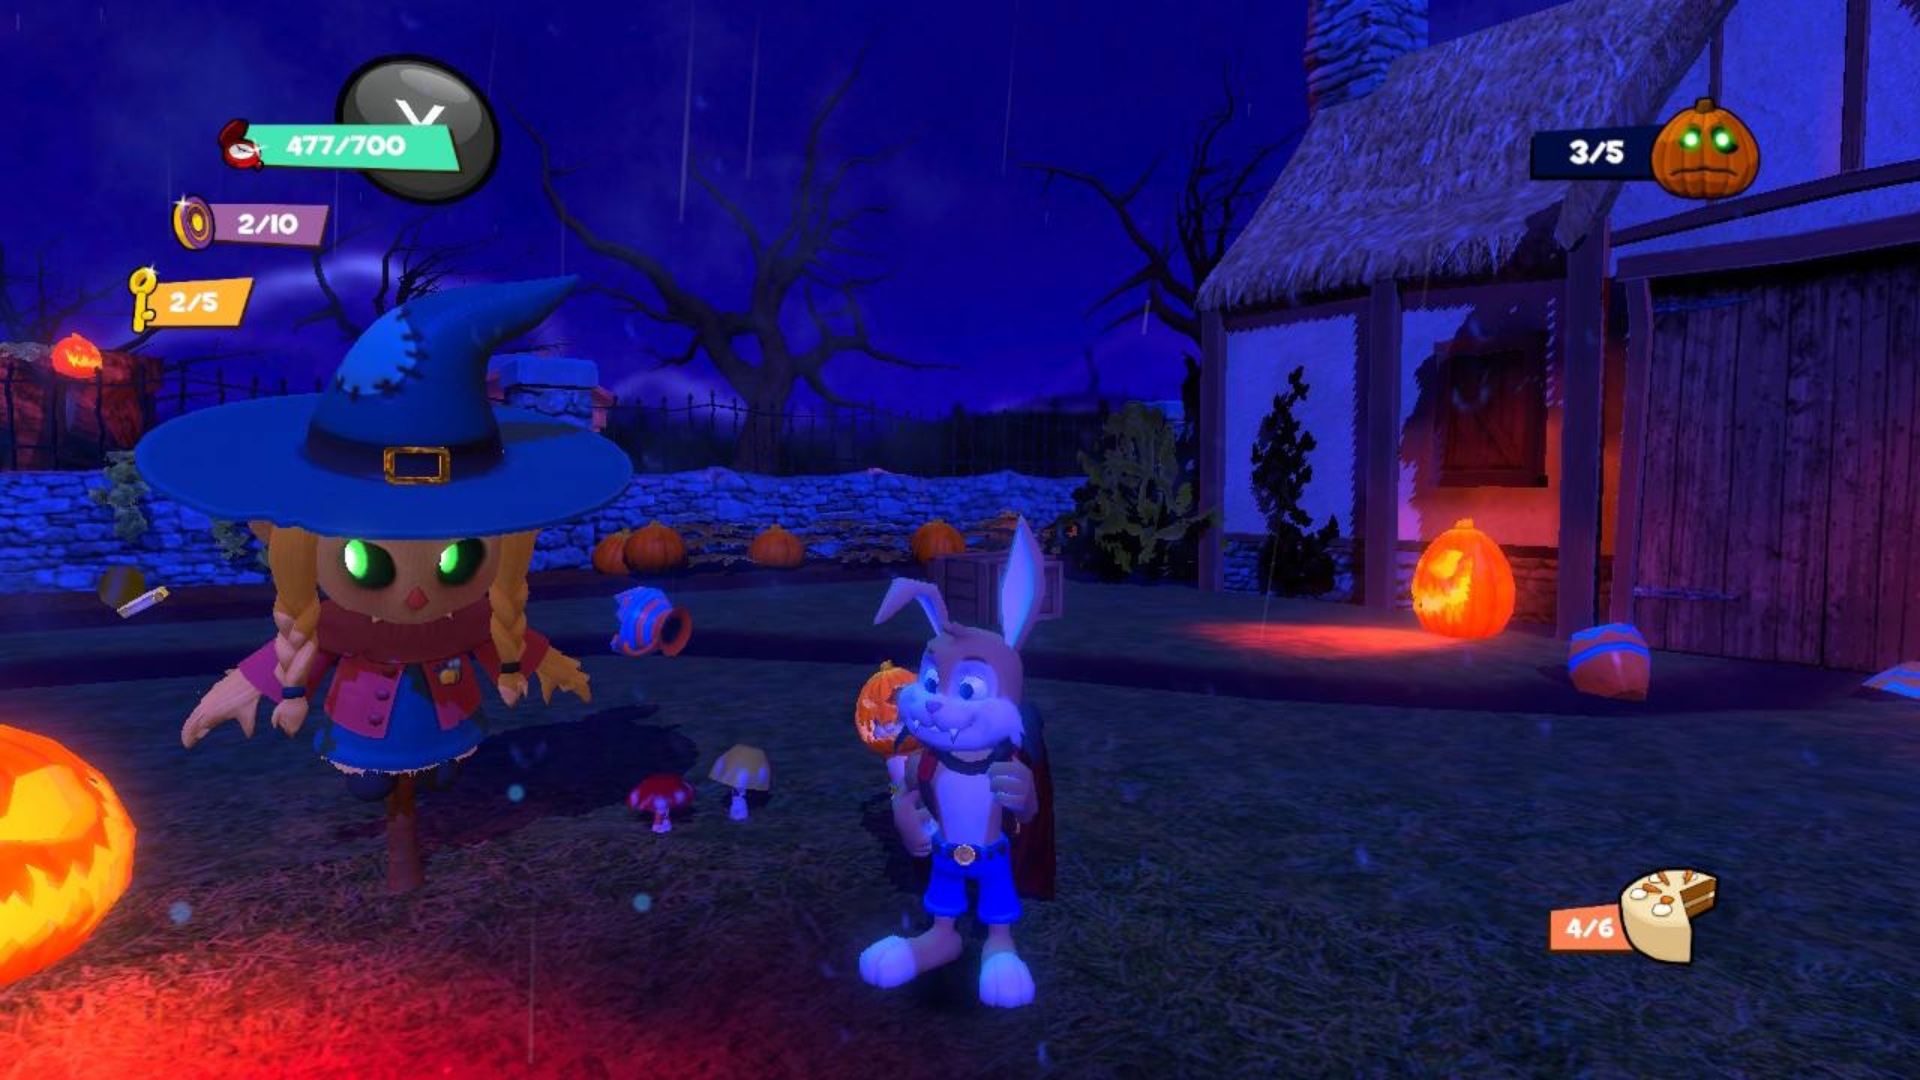 Clive 'N' Wrench review image showing the duo by a scarecrow character in a spooky location.